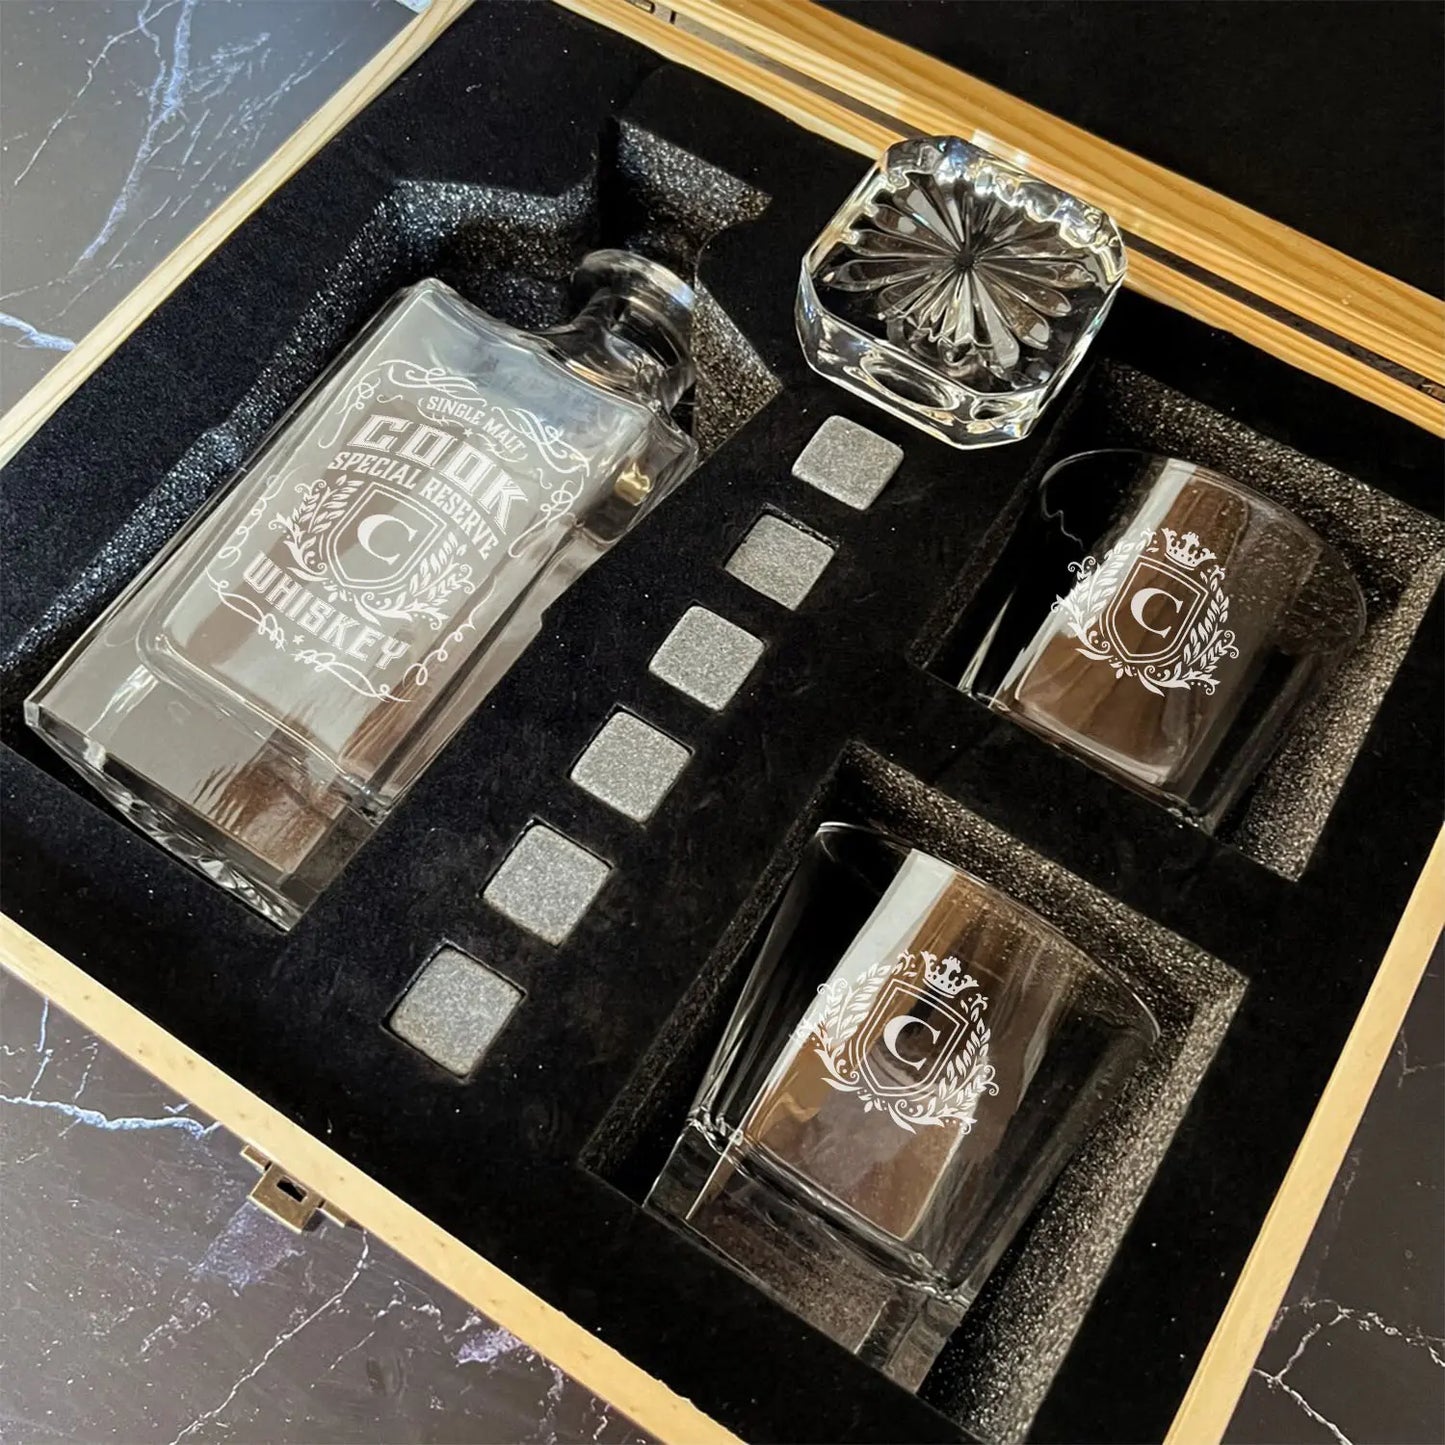 COOK A01 Personalized Decanter Set wooden box and Ice 9